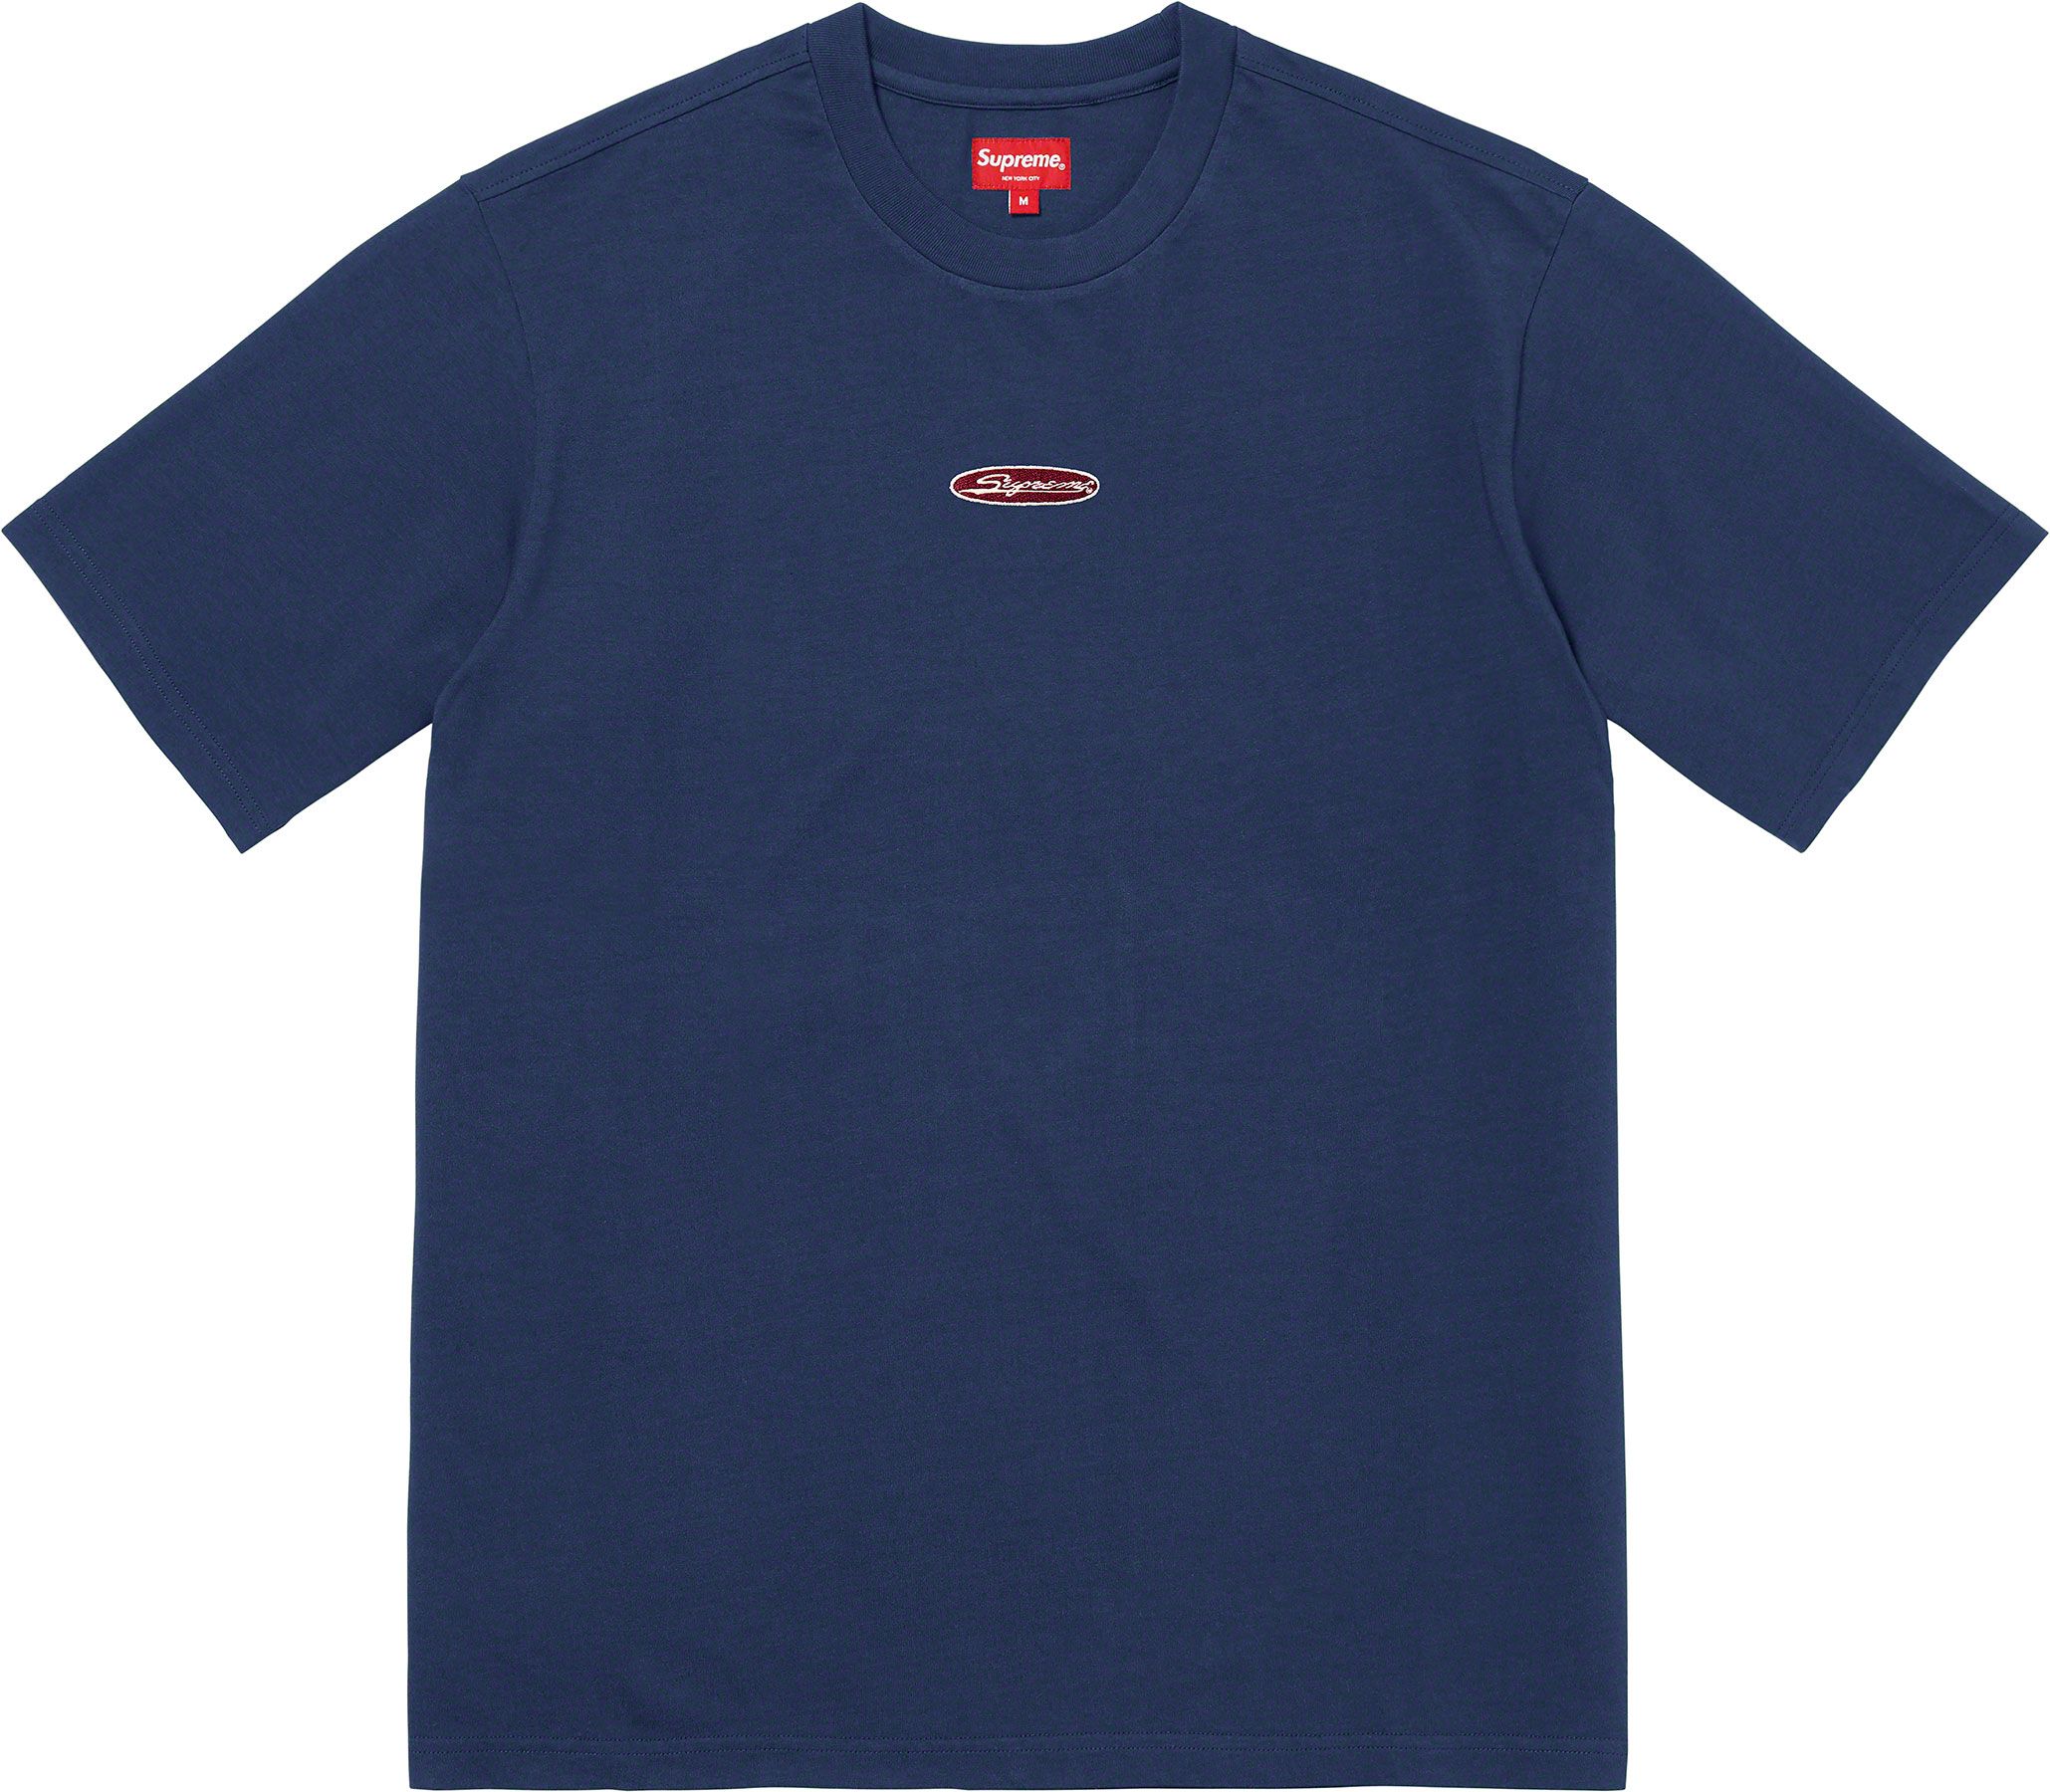 Supreme one two fack you  S/S top  Tシャツ